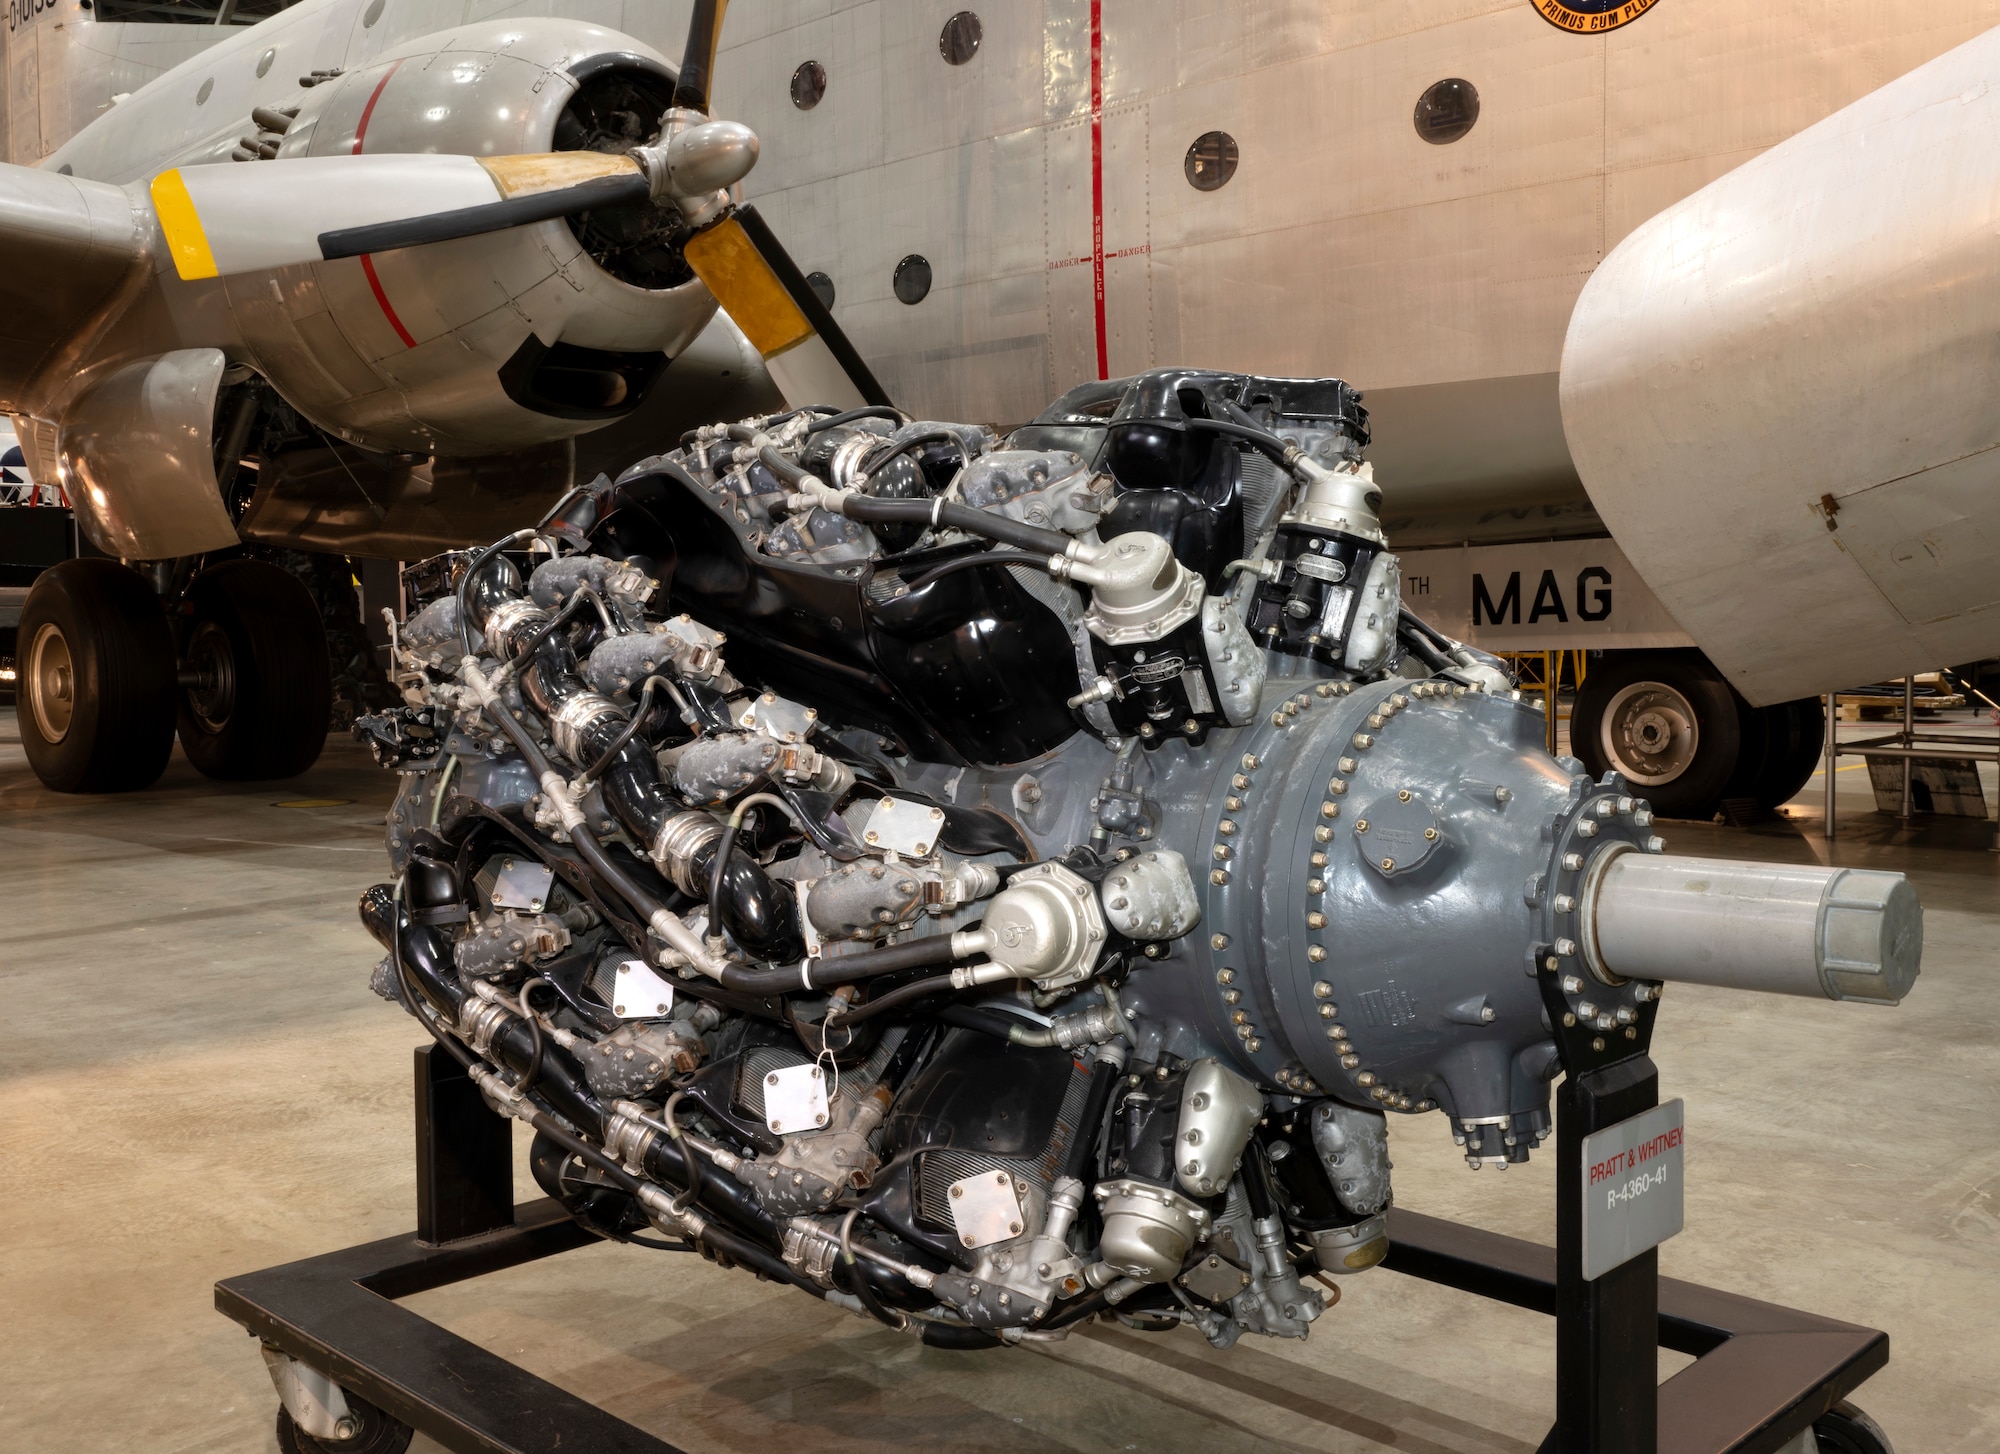 Pratt & Whitney R-4360 engine on display in the Korean War Gallery at the National Museum of the United States Air Force. (Photo by: Ty Greenlees)